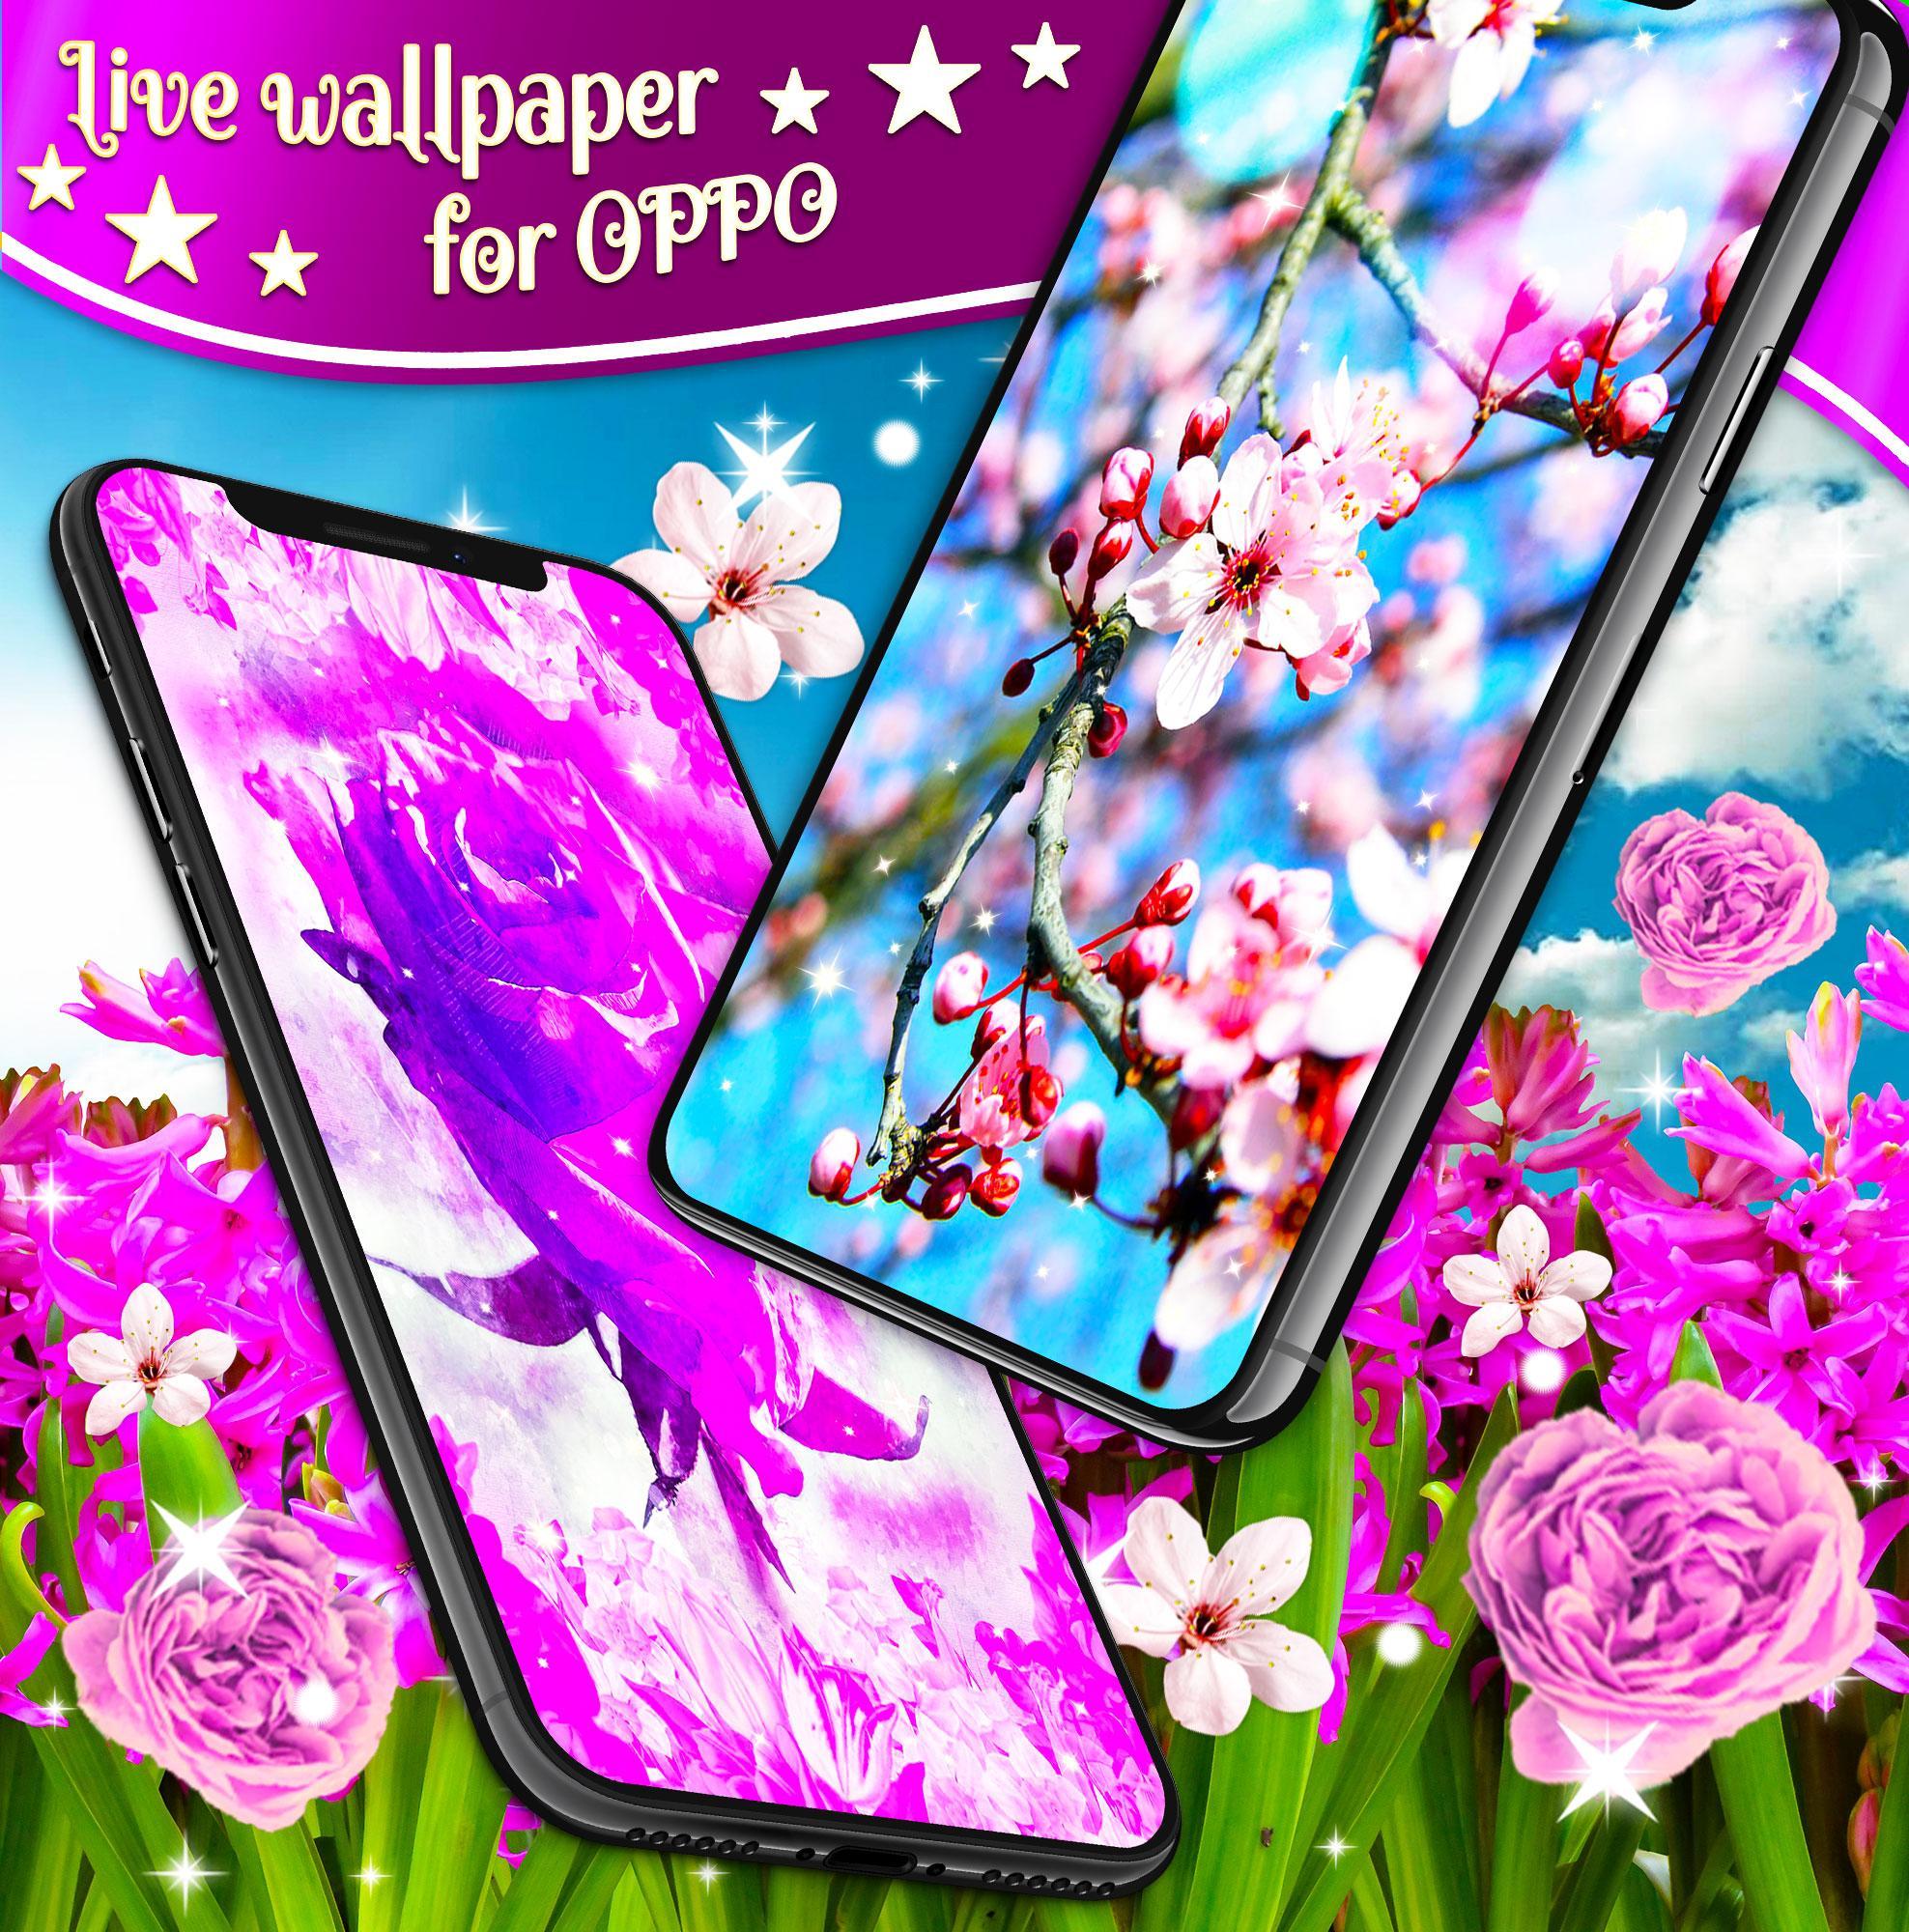 HD Live Wallpaper for OPPO ⭐ 4K Wallpapers Themes 6.7.2 Screenshot 2